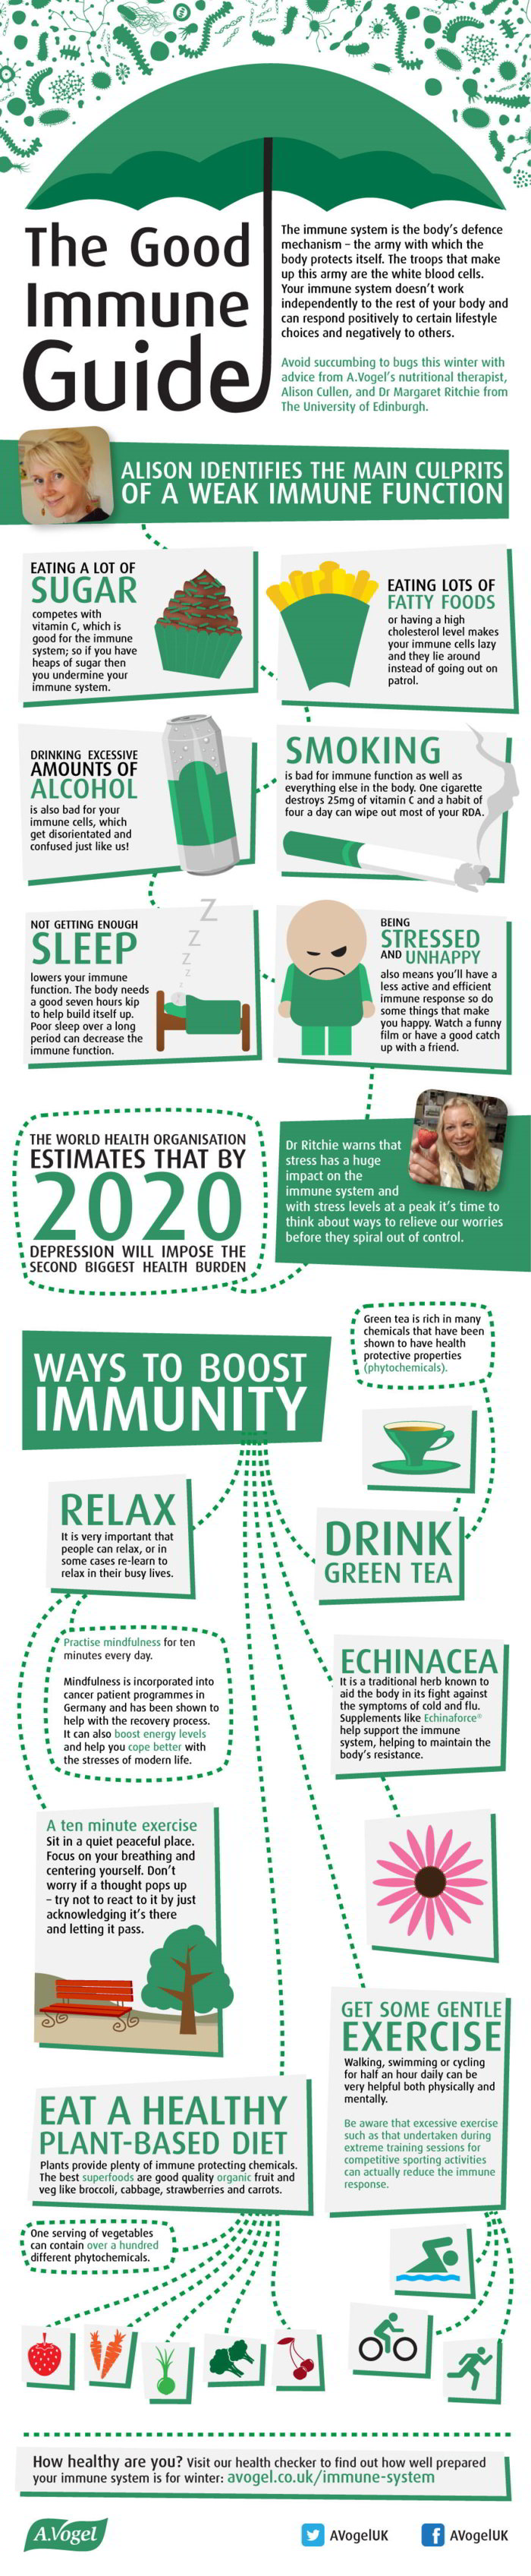 The Good Immune Guide Infographic